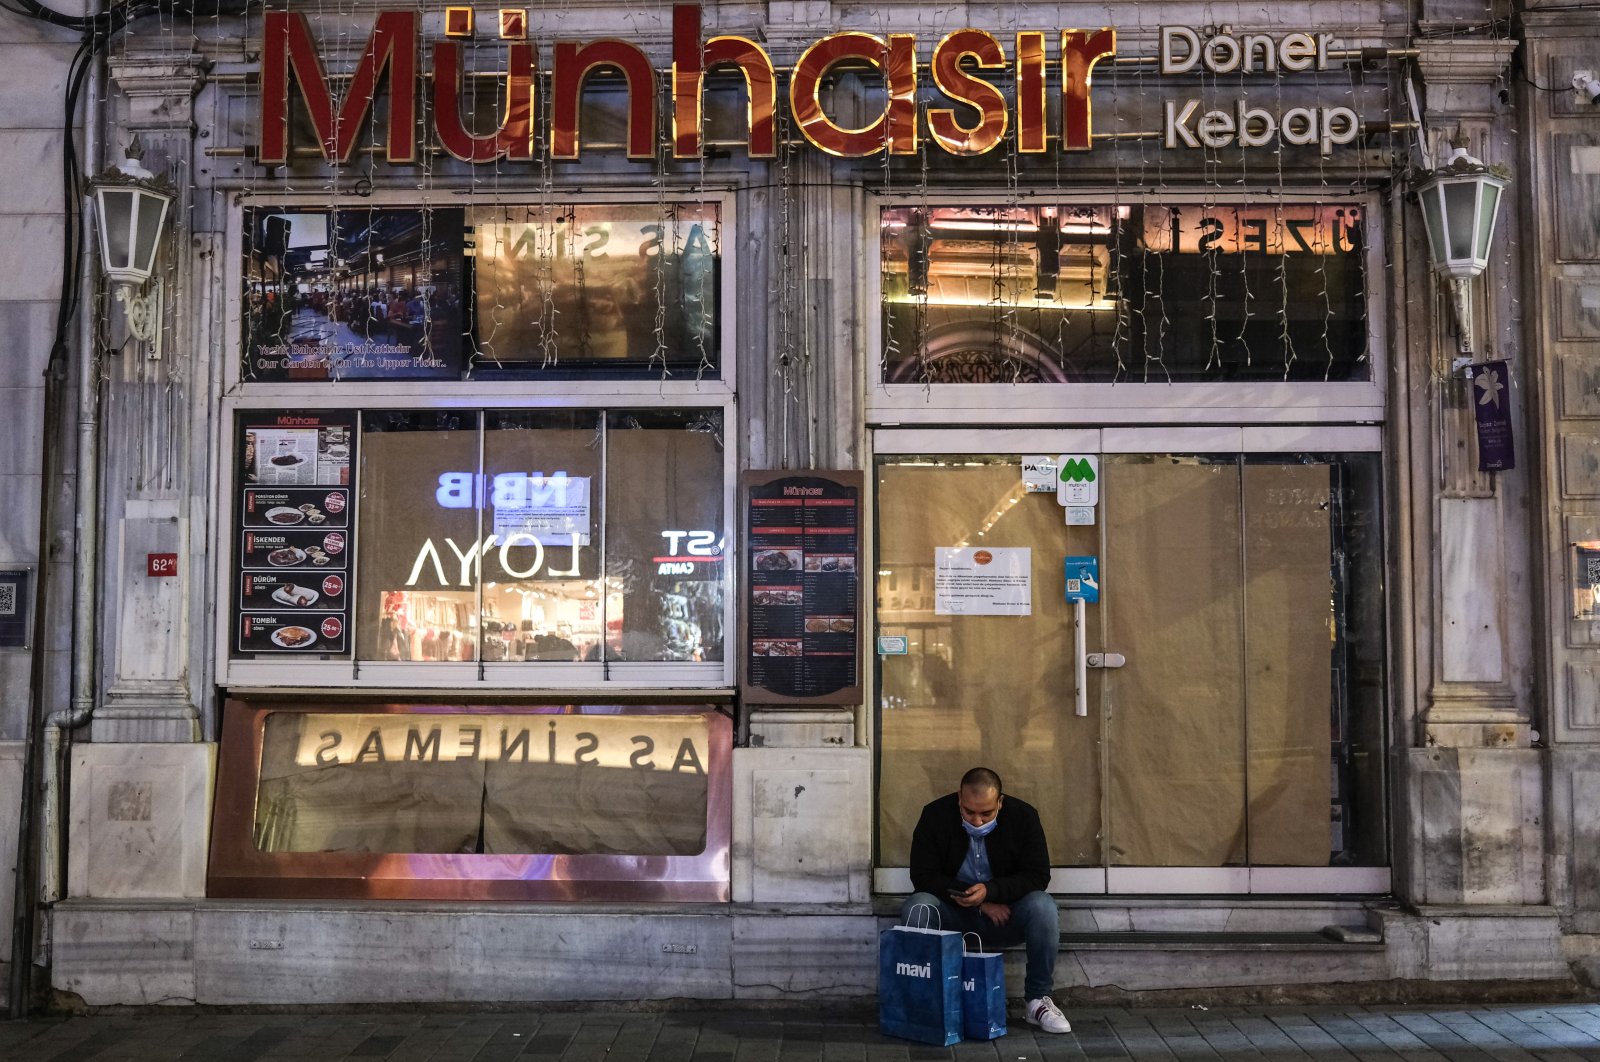 A man wearing a mask sits in front of the closed Turkish Kebap-Döner restaurant on Istiklal Avenue in Istanbul, Turkey, Jan. 22, 2021. (EPA Photo)